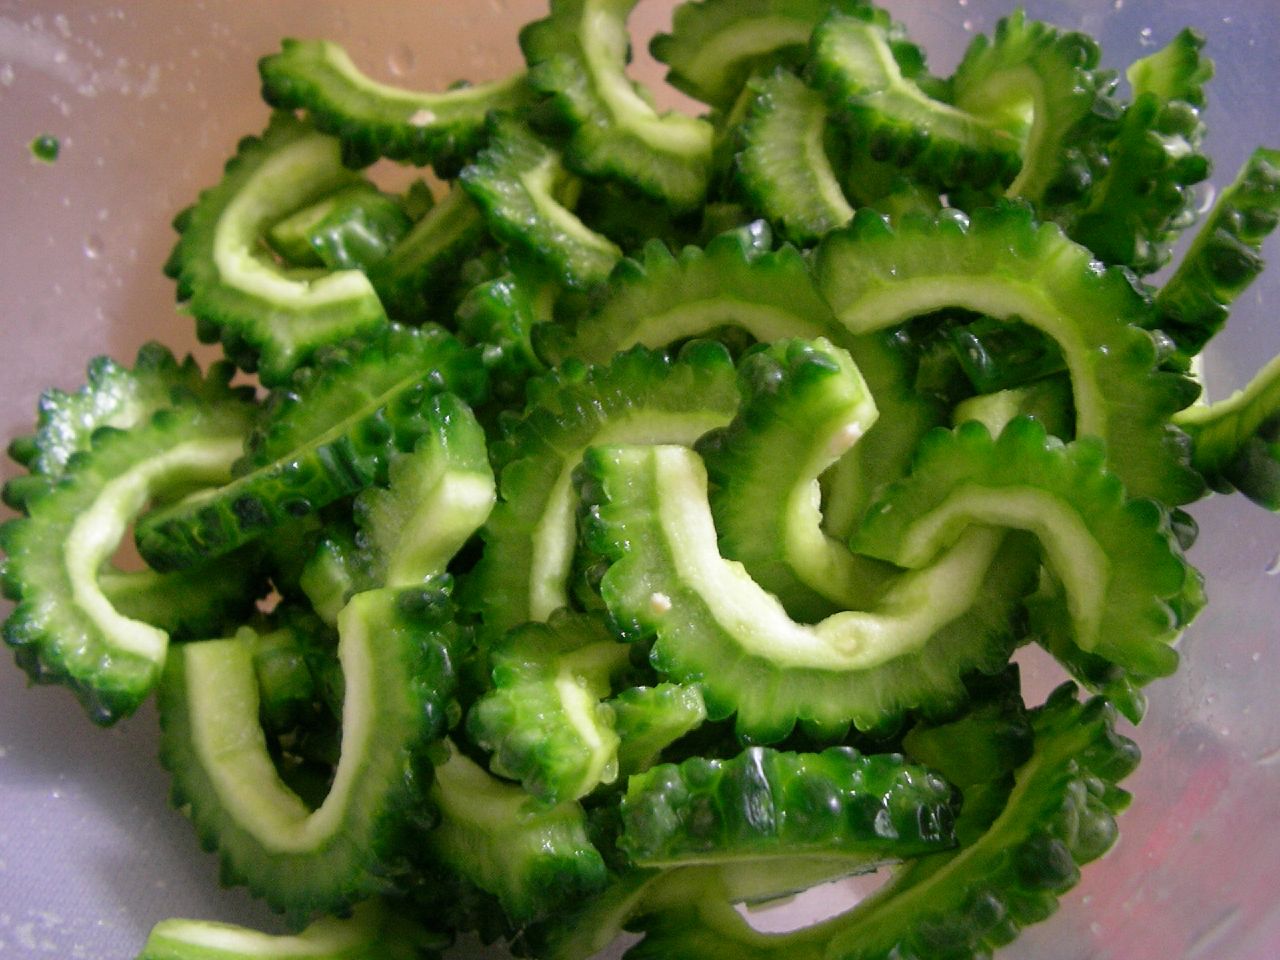 a pile of green vegetables that have been cut into smaller pieces